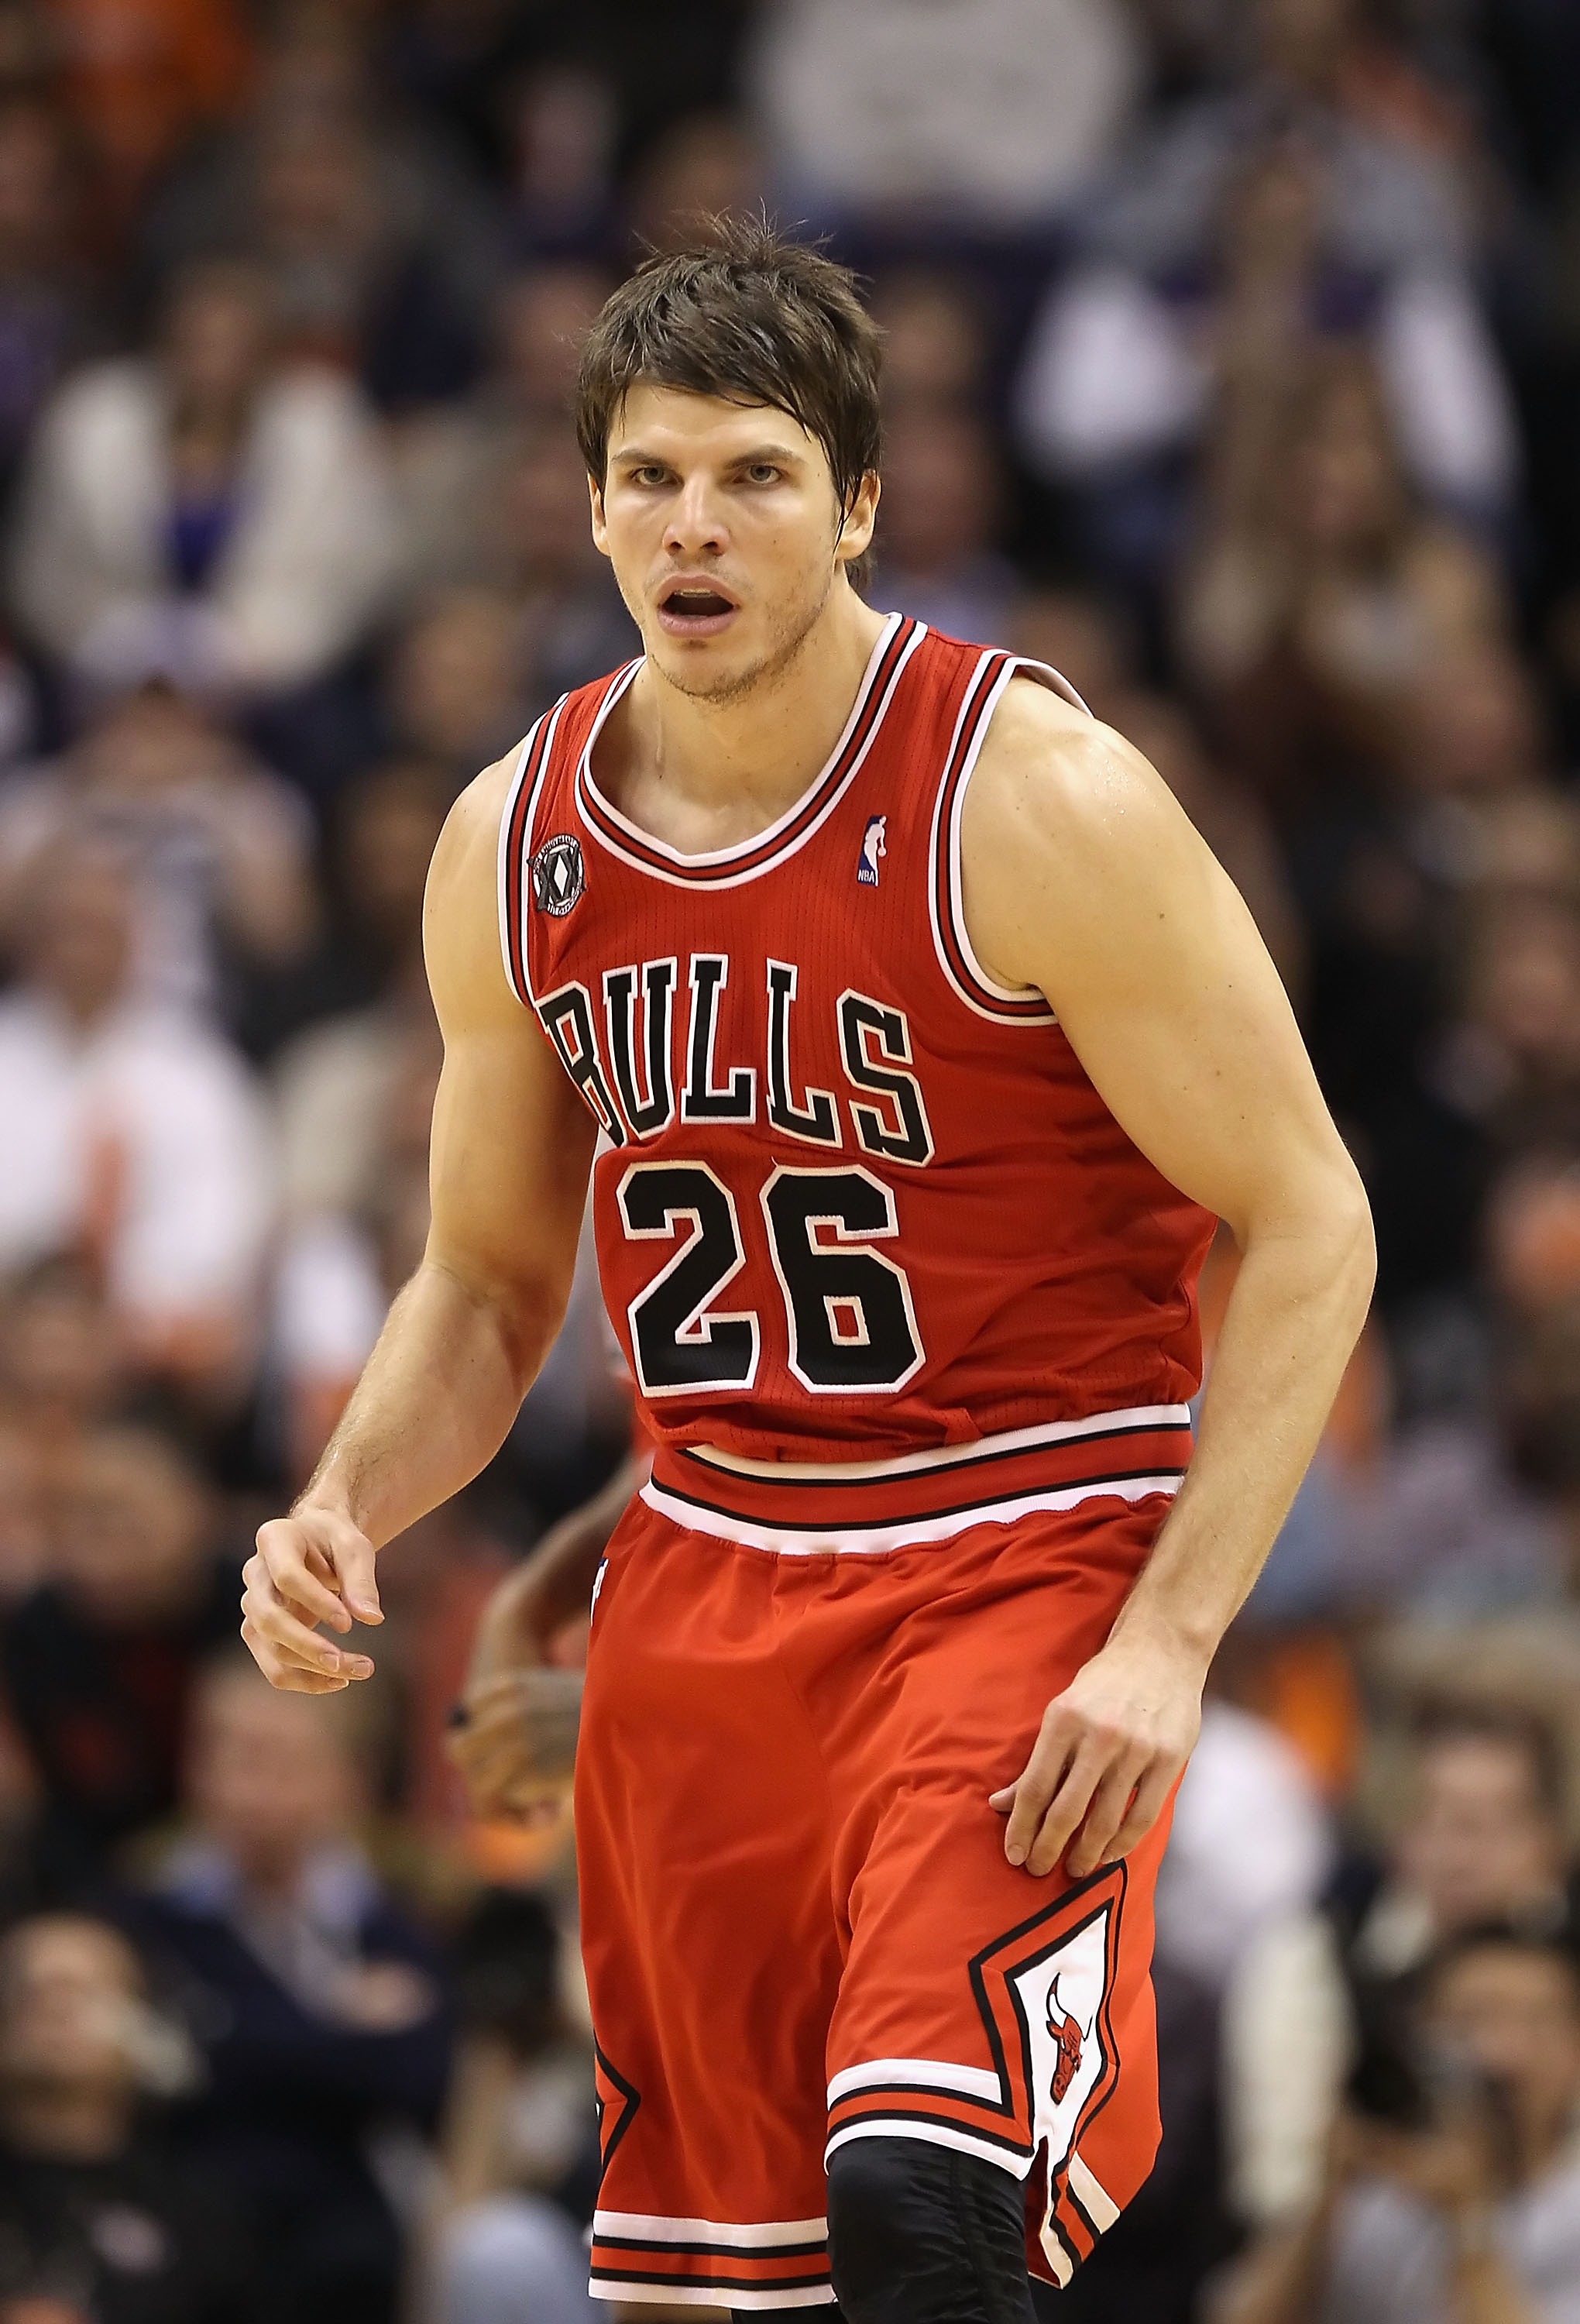 PHOENIX - NOVEMBER 24:  Kyle Korver #26 of the Chicago Bulls during the NBA game against the Phoenix Suns at US Airways Center on November 24, 2010 in Phoenix, Arizona. NOTE TO USER: User expressly acknowledges and agrees that, by downloading and or using